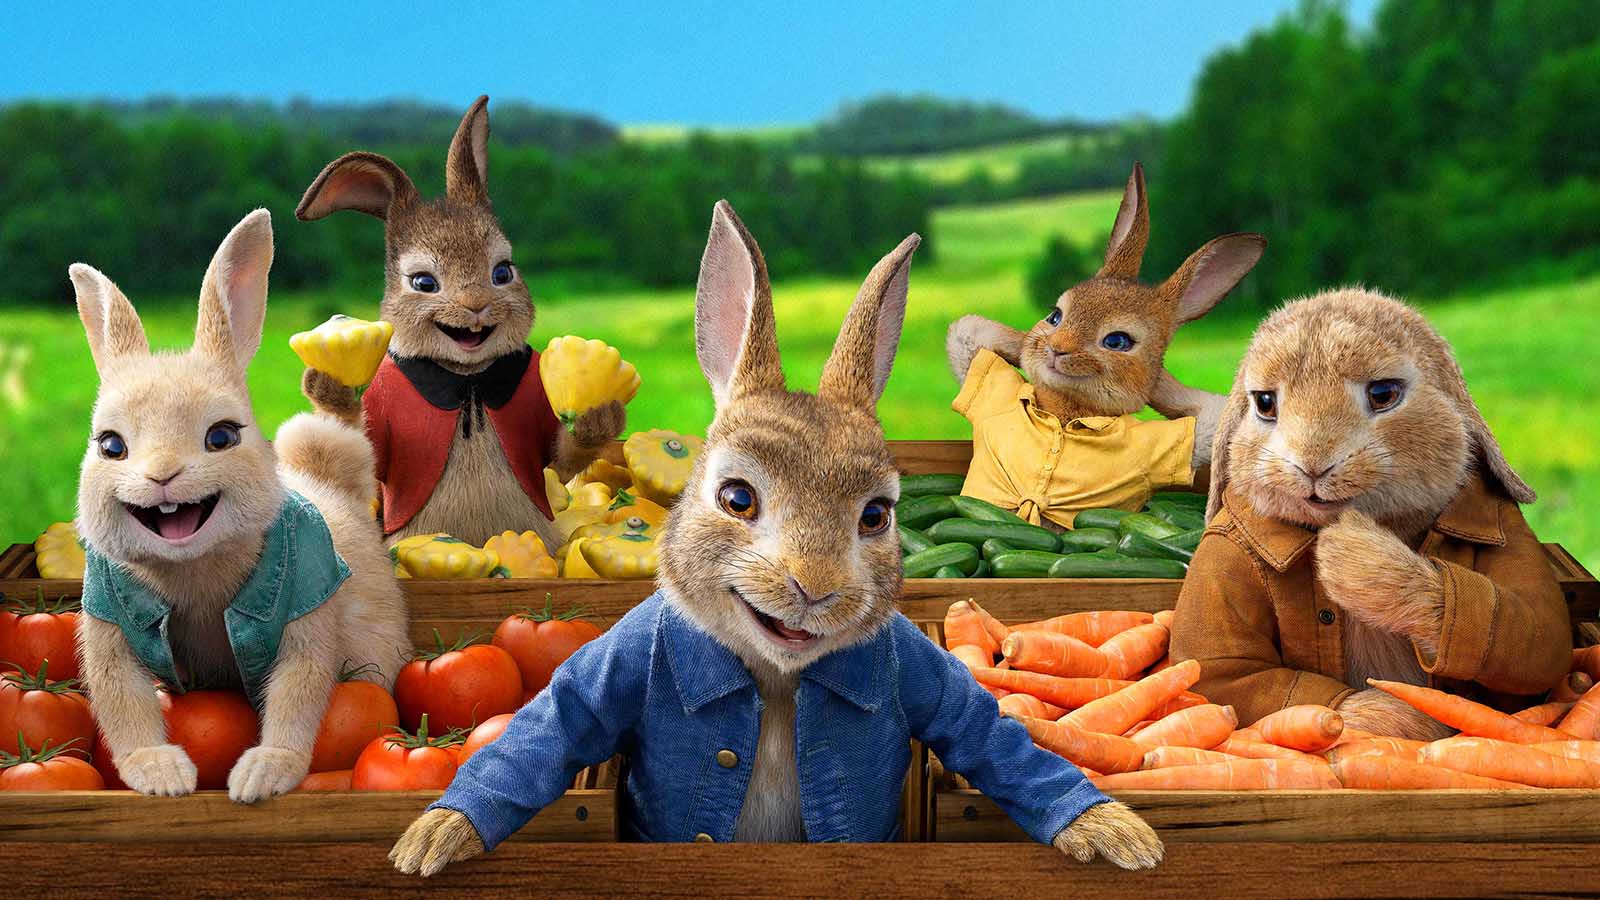 Peter Rabbit and friends make healthy food choices